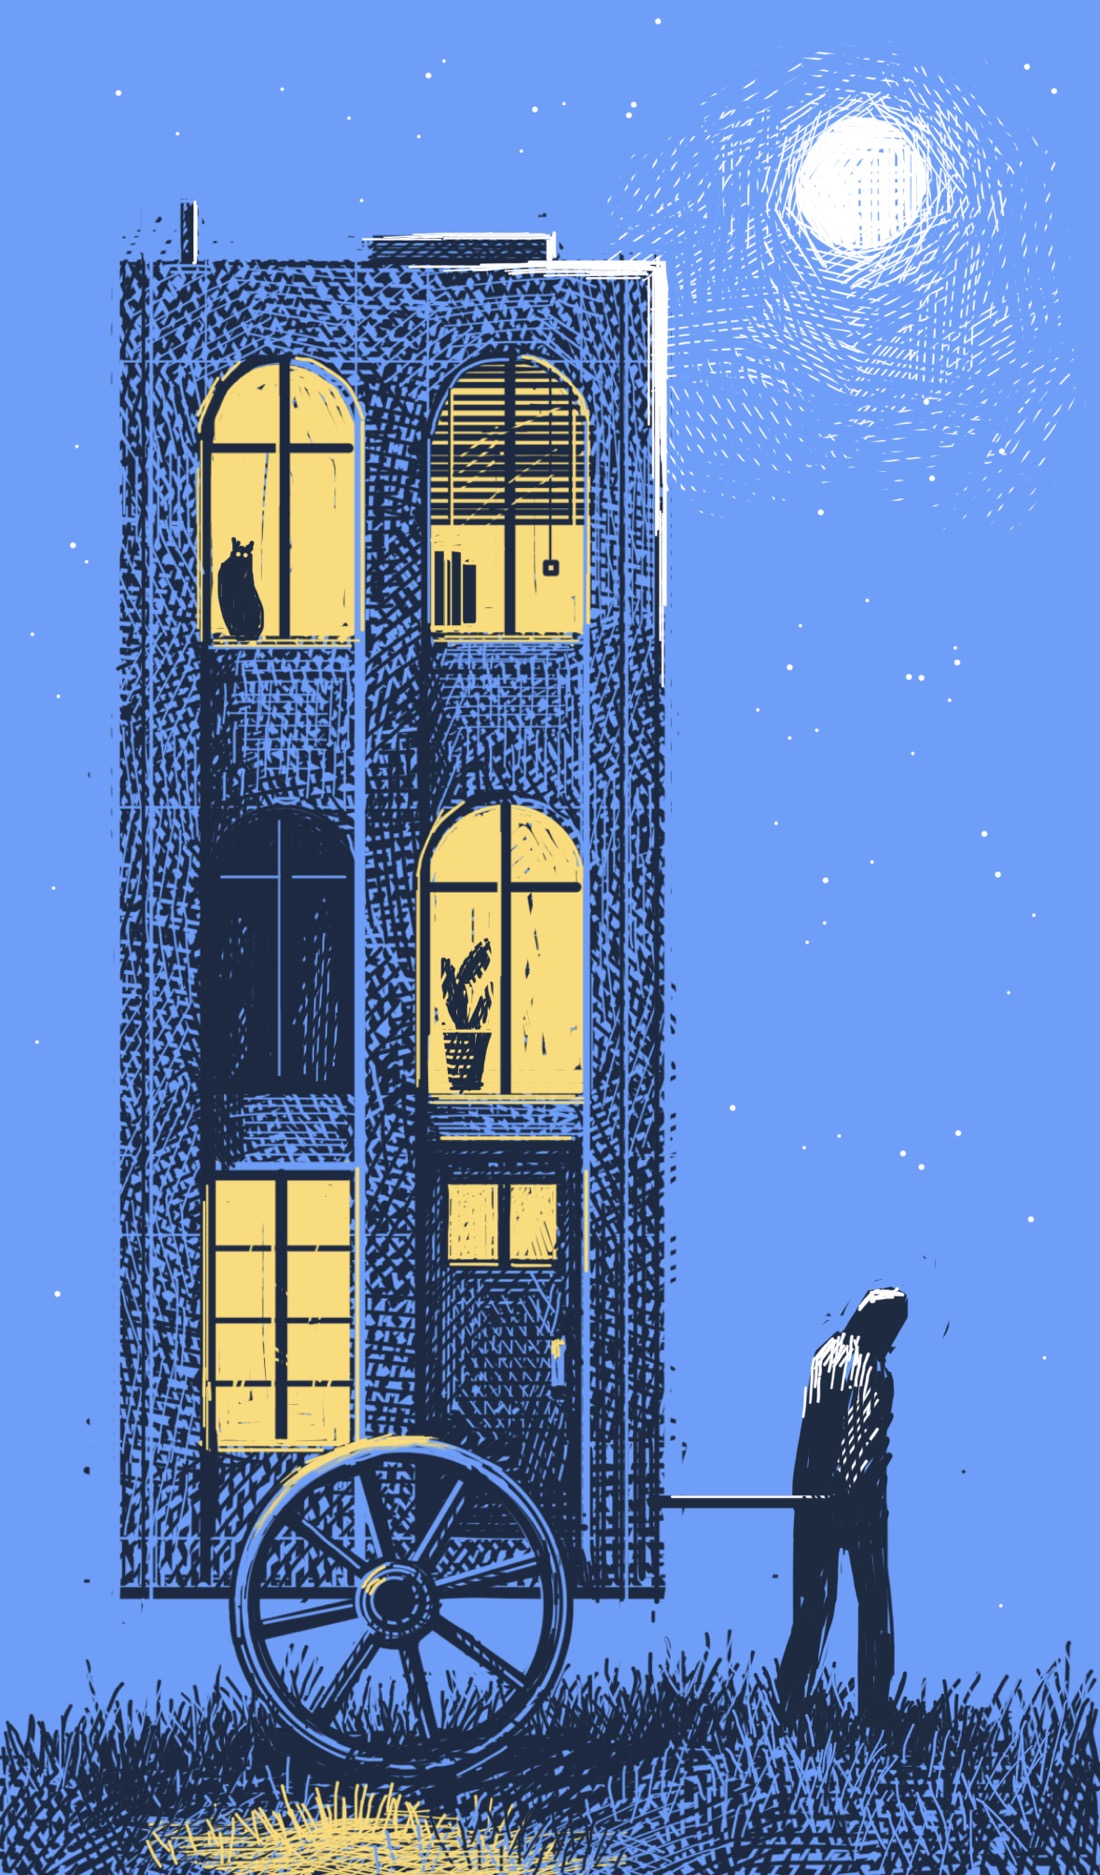 A lone figure walks on a moonlit night, pulling a small tenement building seemingly placed in a two-wheeled cart. Most of the windows in the building are lit. A cat is visible in one; a plant is in the other.